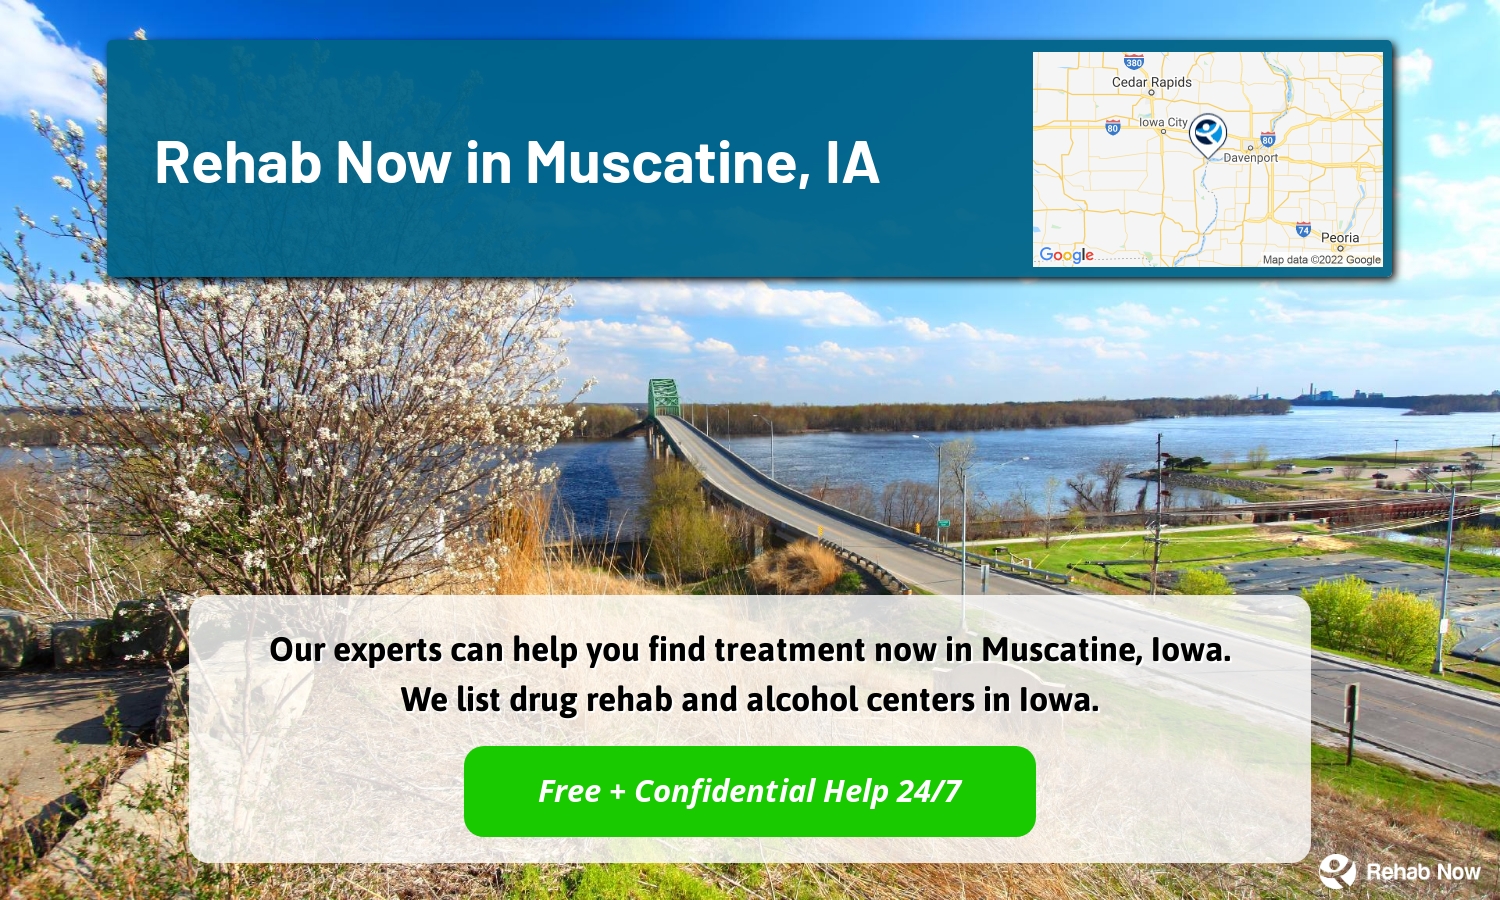 Our experts can help you find treatment now in Muscatine, Iowa. We list drug rehab and alcohol centers in Iowa.